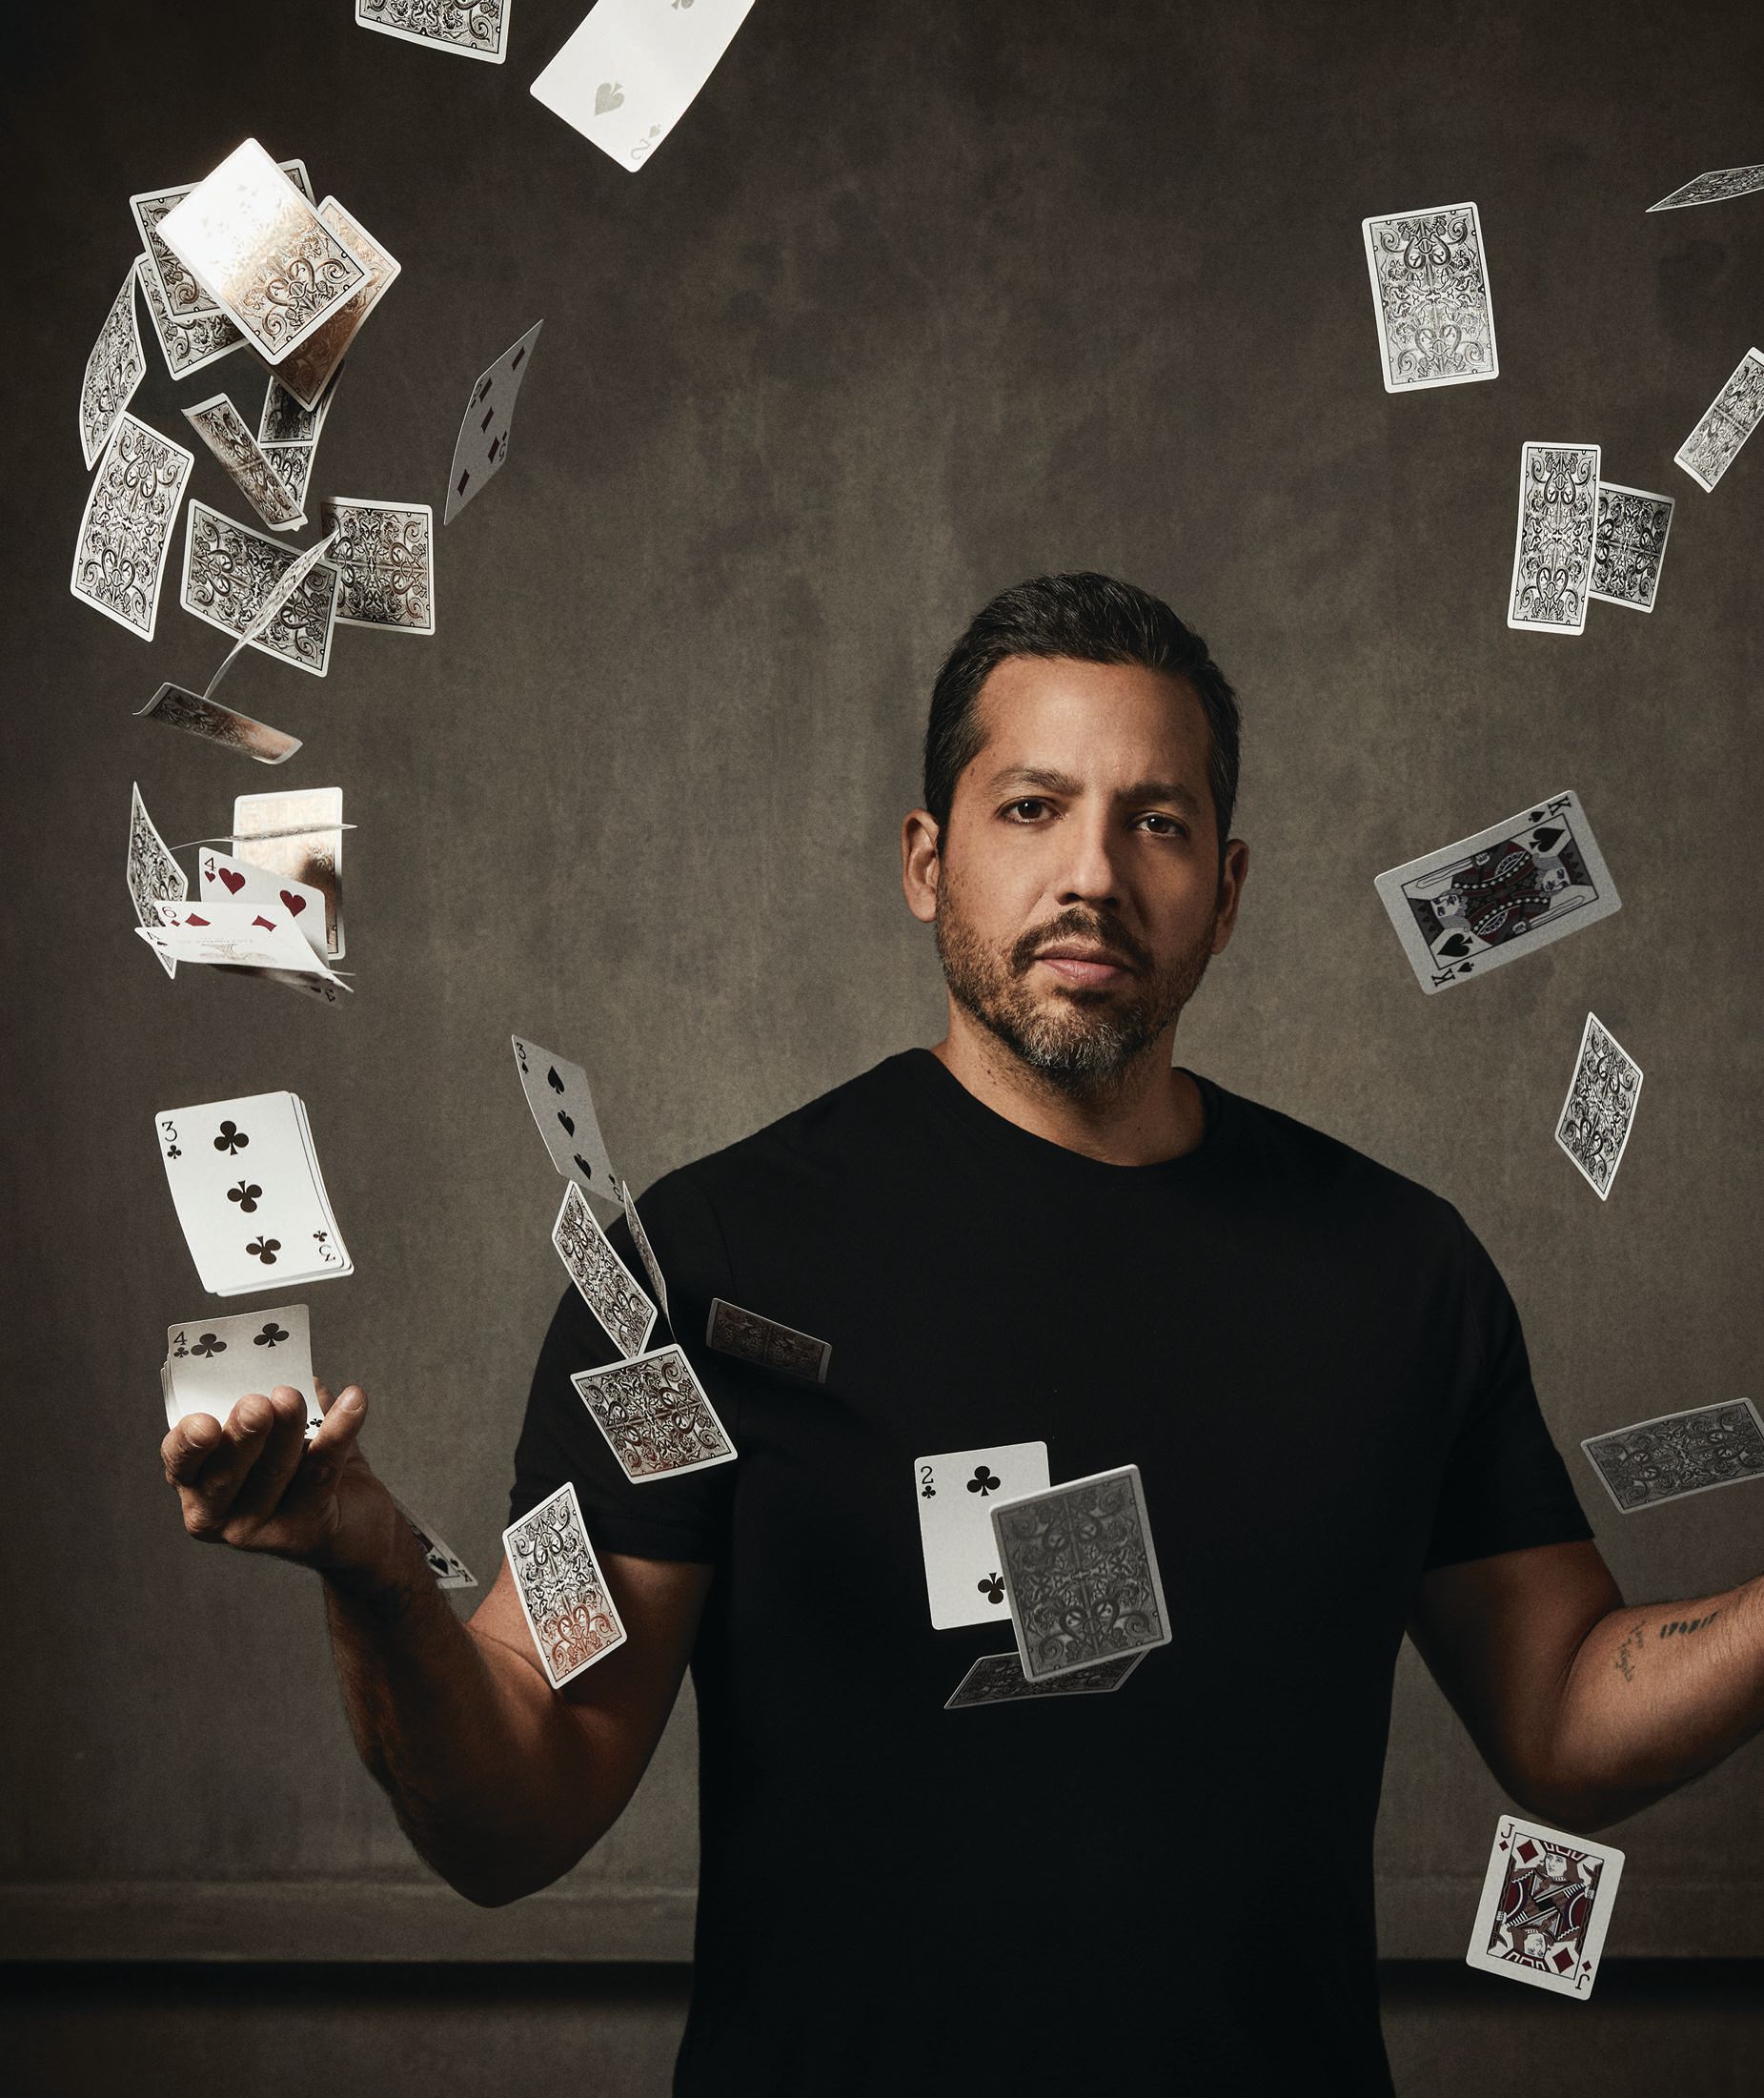 Master illusionist David Blaine begins his inaugural Sin City residency Sept. 30 at Resorts World Las Vegas, with dates on deck through December. PHOTO BY ART STREIBER